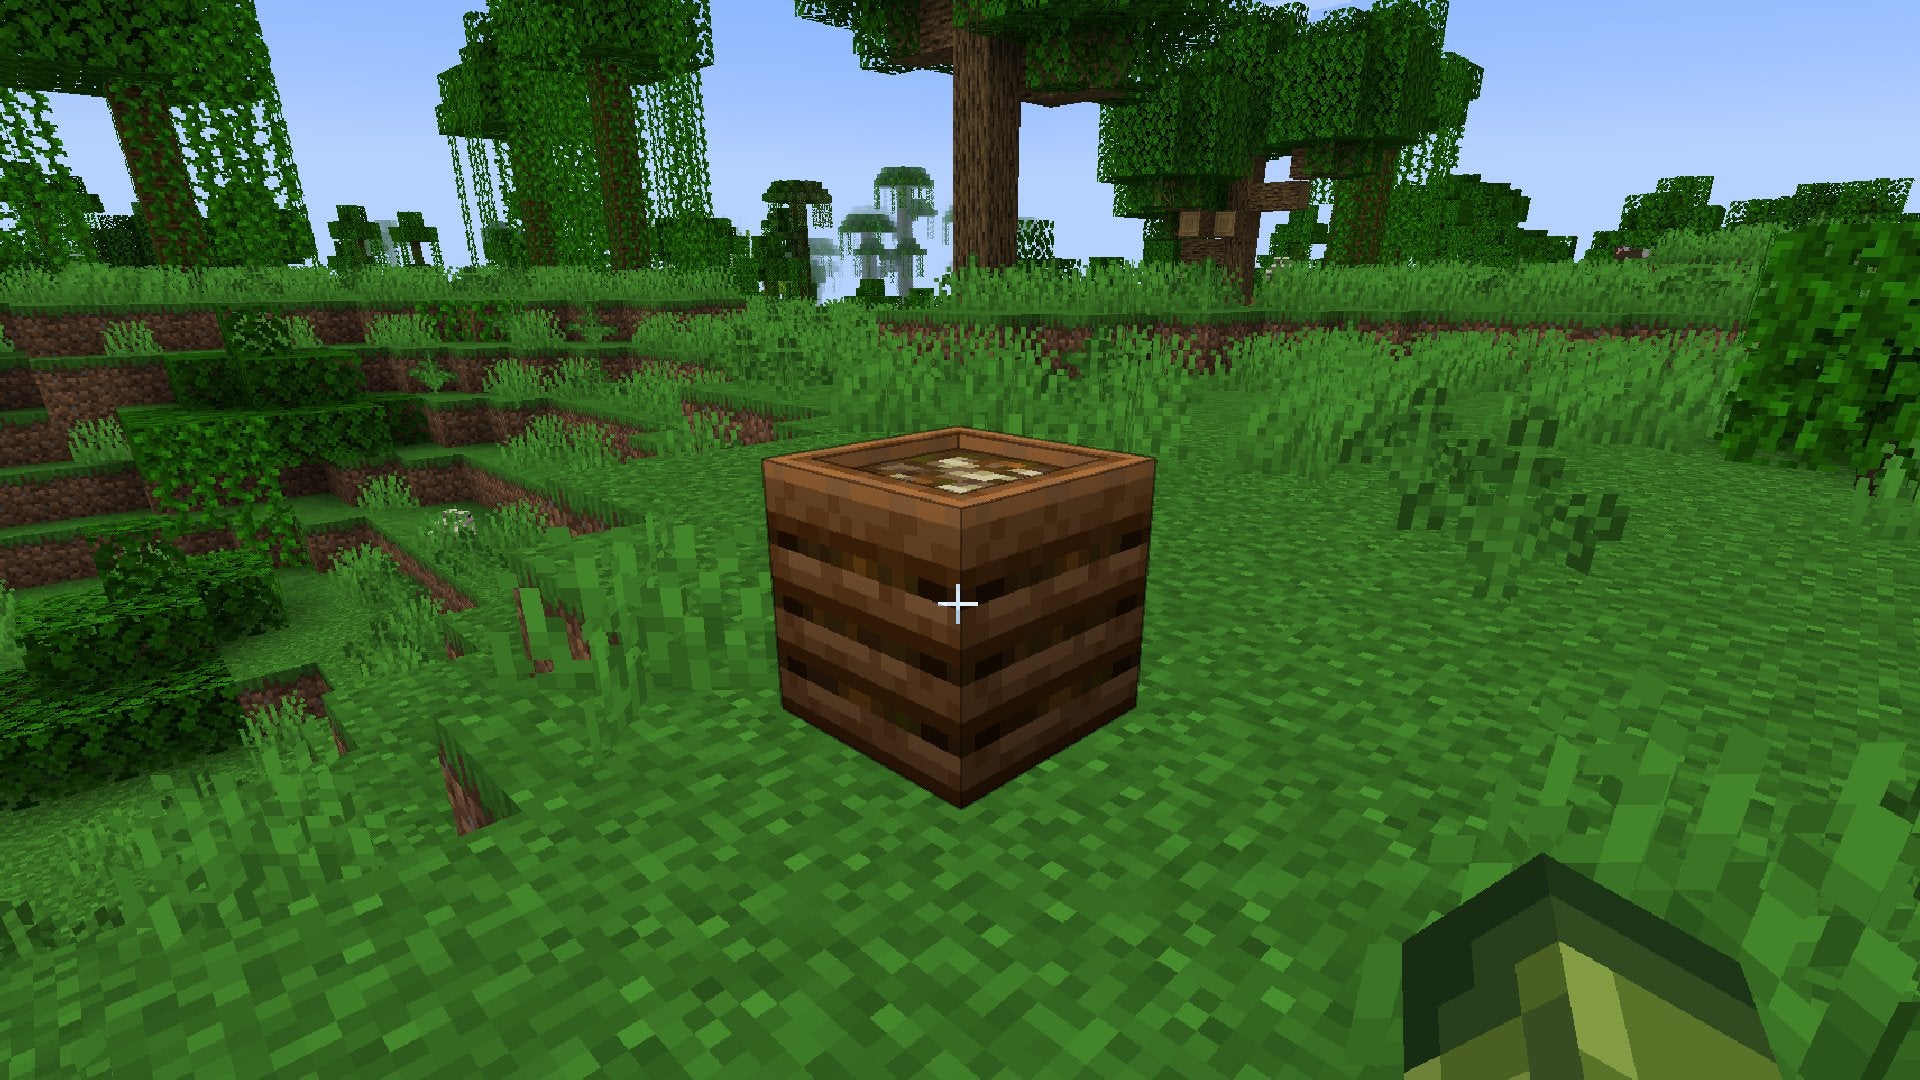 A Composter in a lightly wooded area in Minecraft.